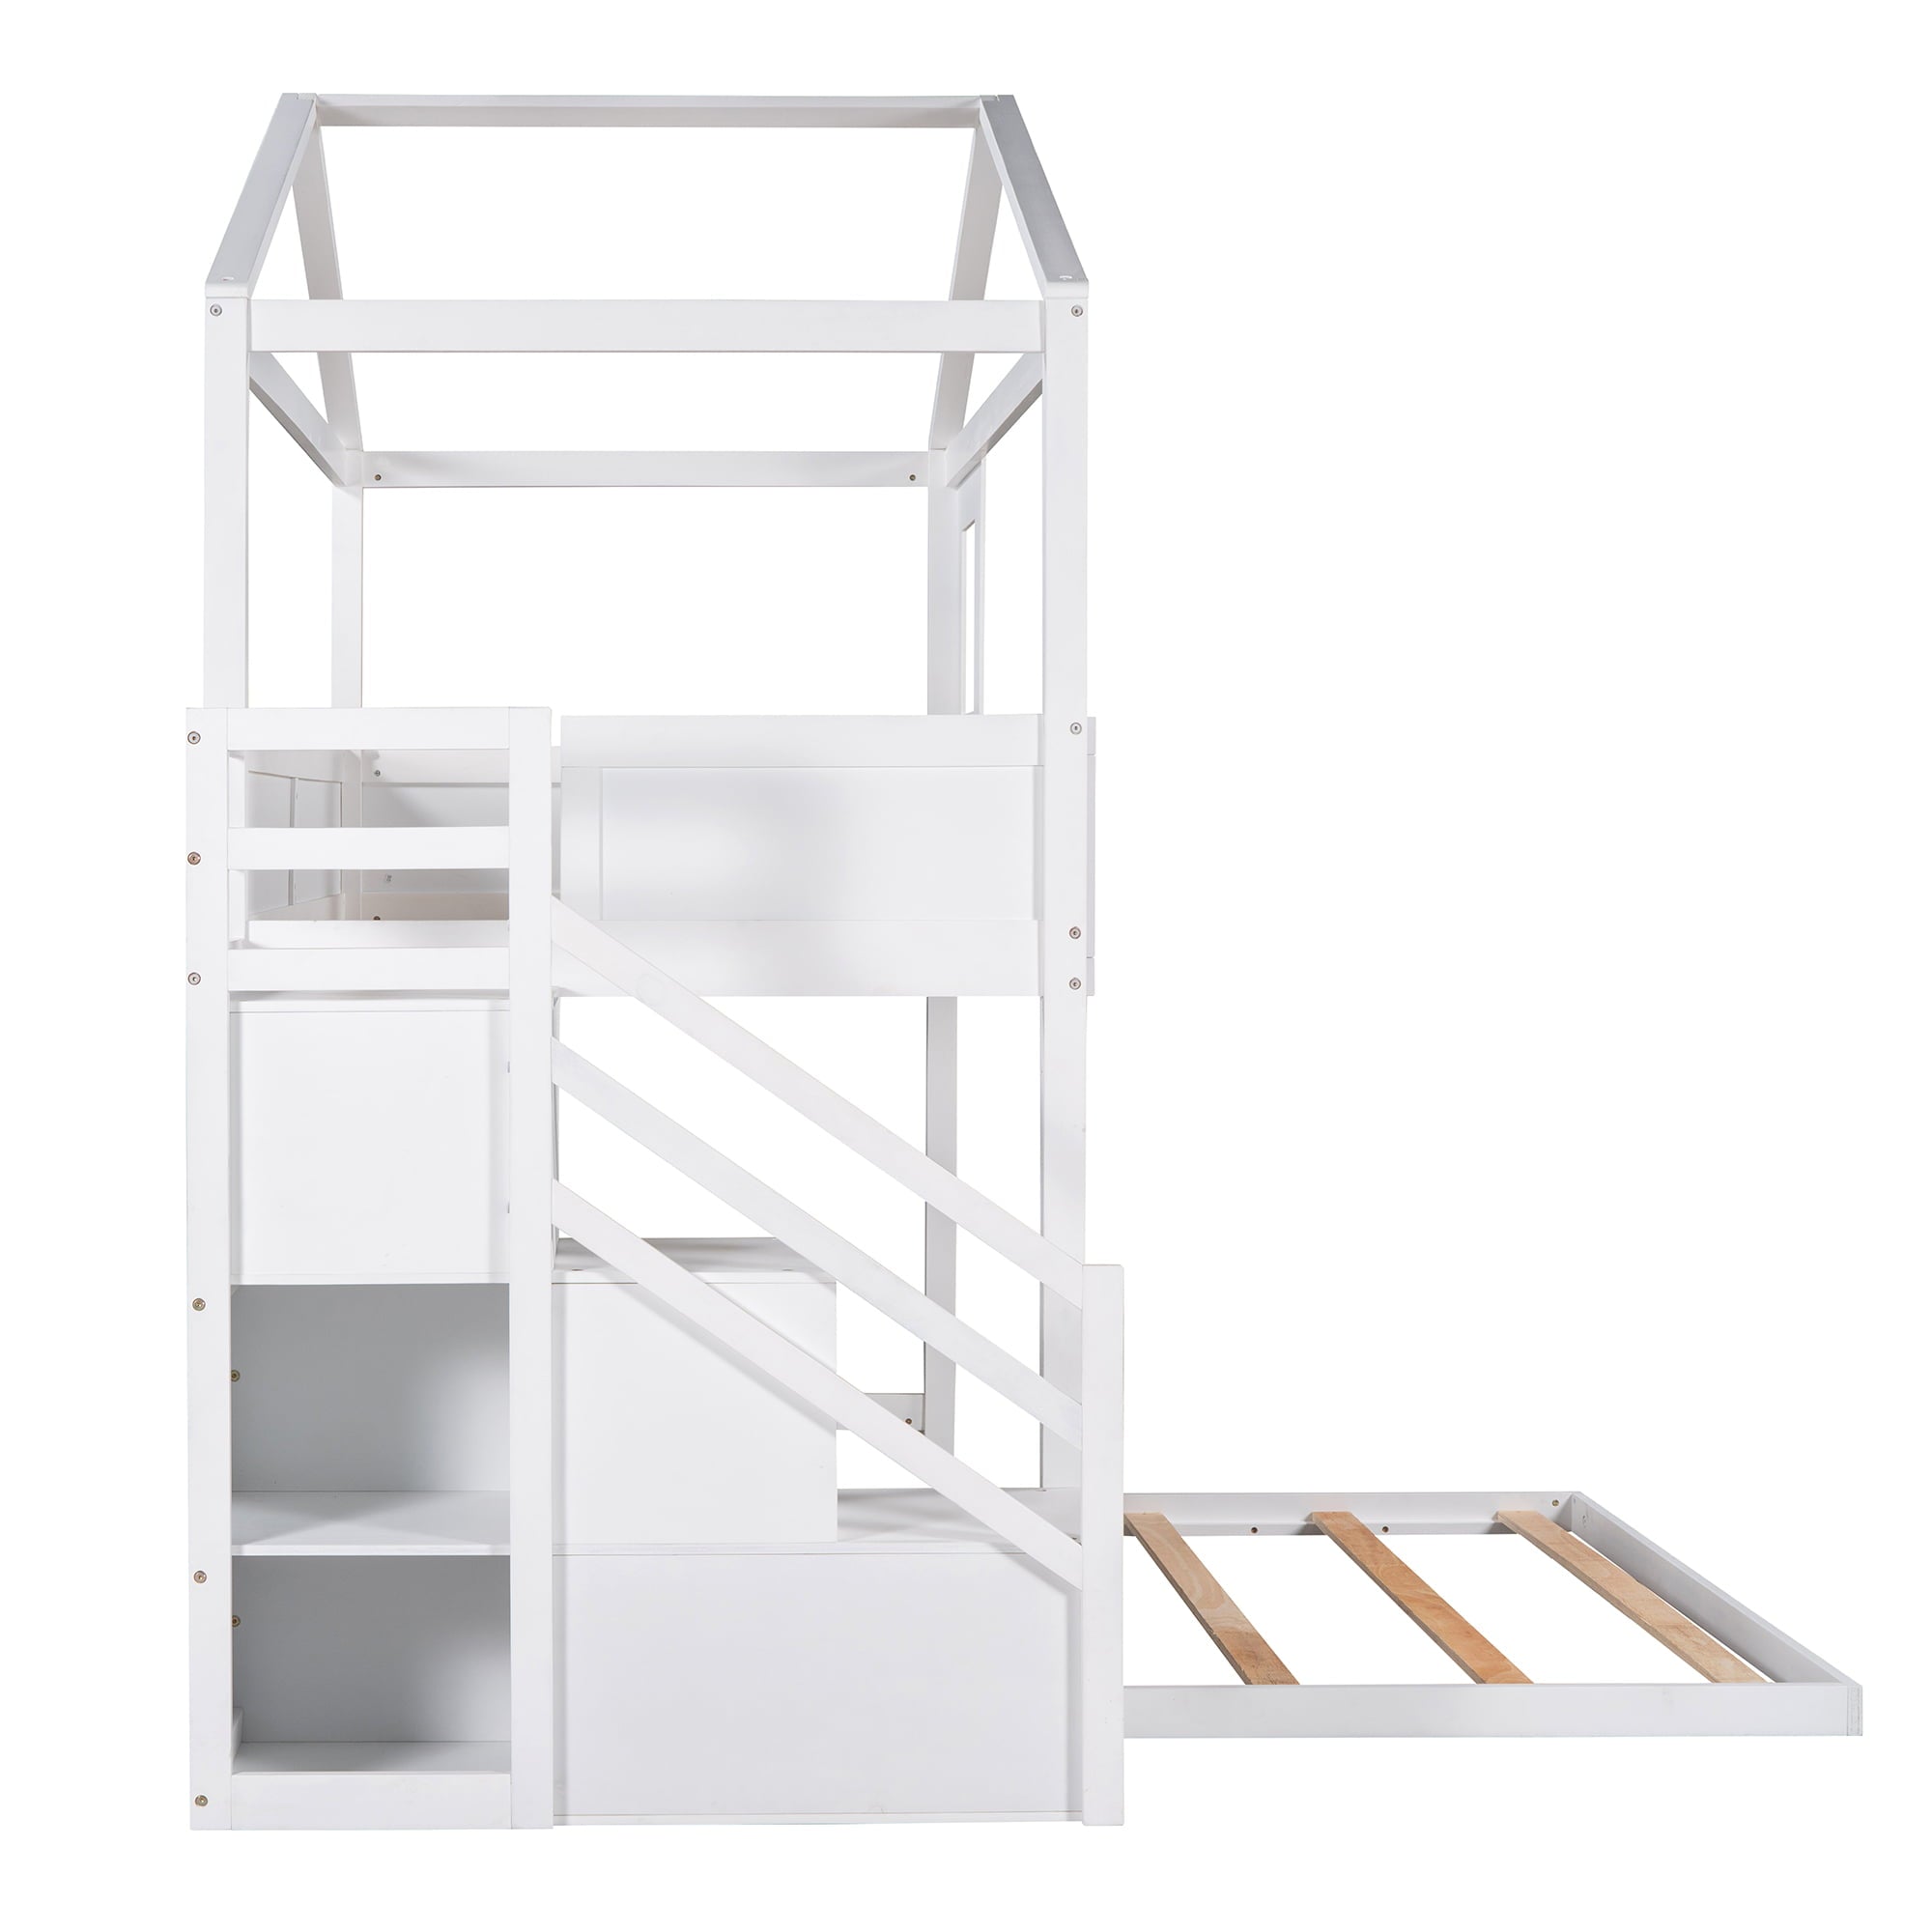 EUROCO Twin over Full House Bunk Bed with Storage Staircase and Blackboard for Kids Bedroom, White